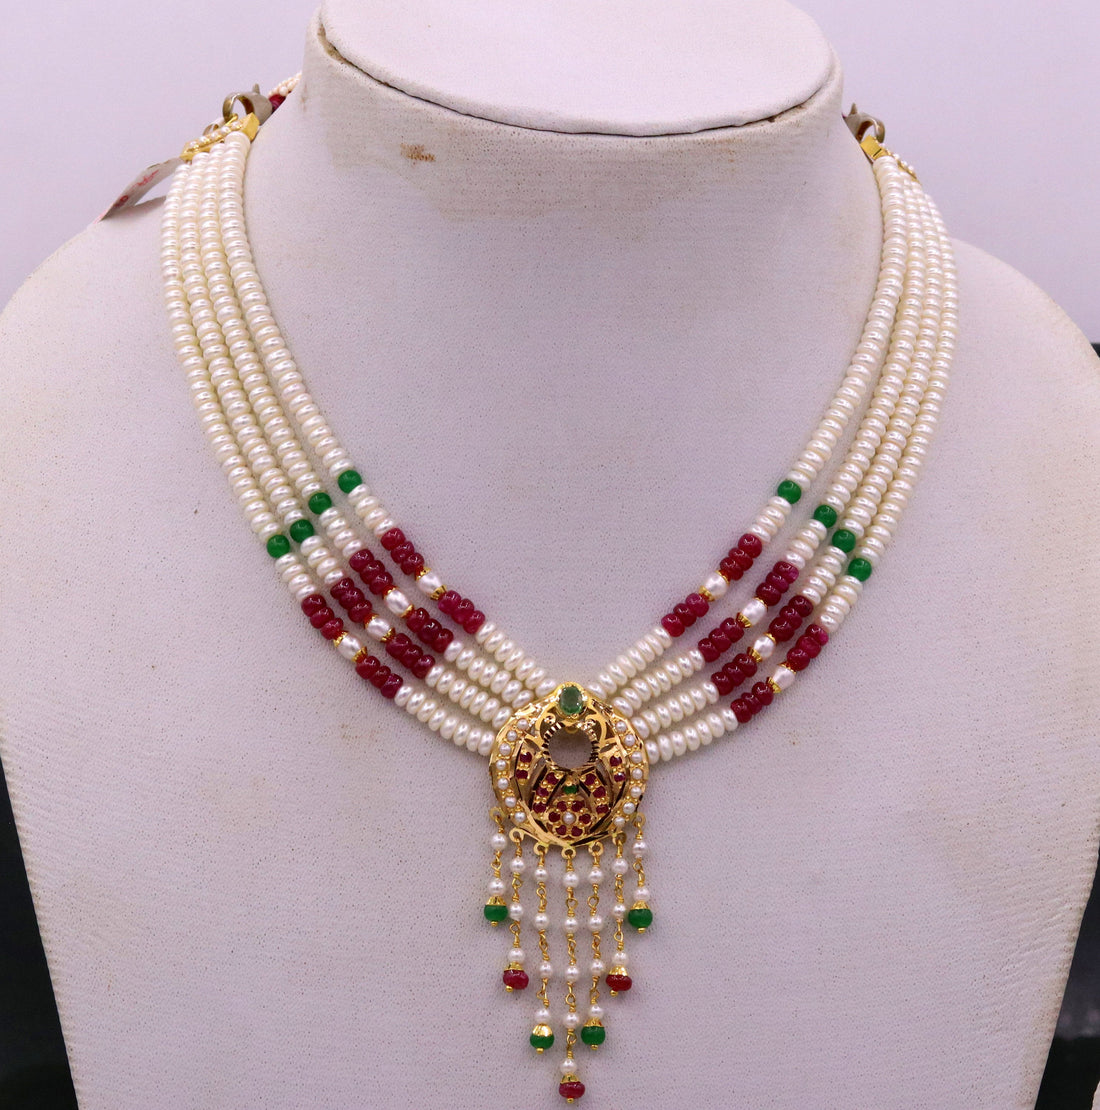 Vintage design handmade 22kt yellow gold fabulous necklace set with amazing hanging color beads, wedding party tribal jewelry india - TRIBAL ORNAMENTS